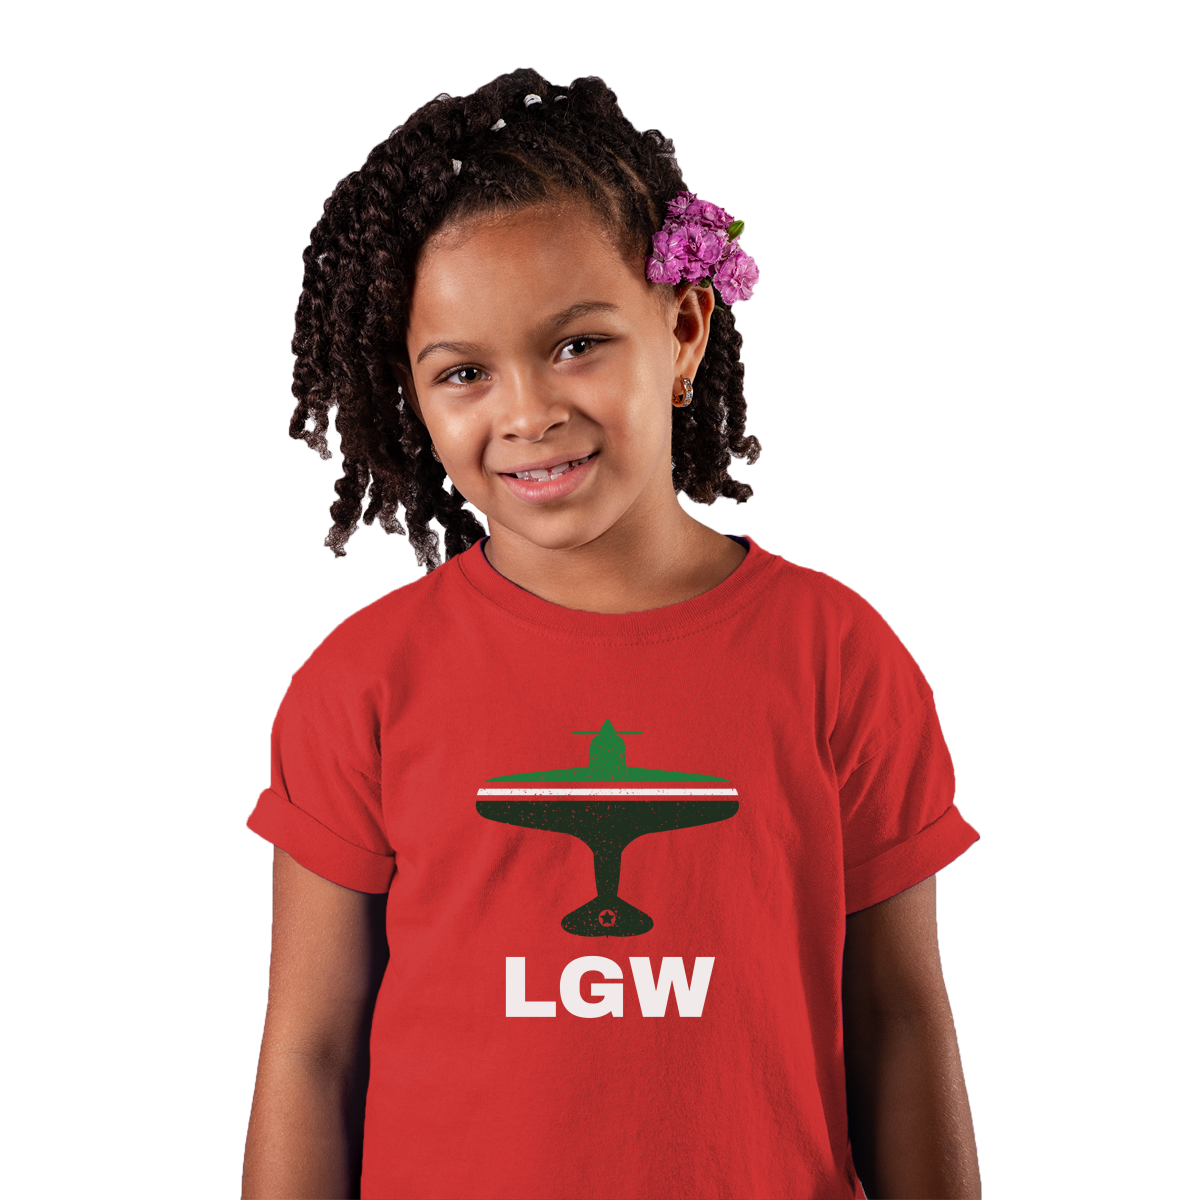 Fly London LGW Airport Kids T-shirt | Red